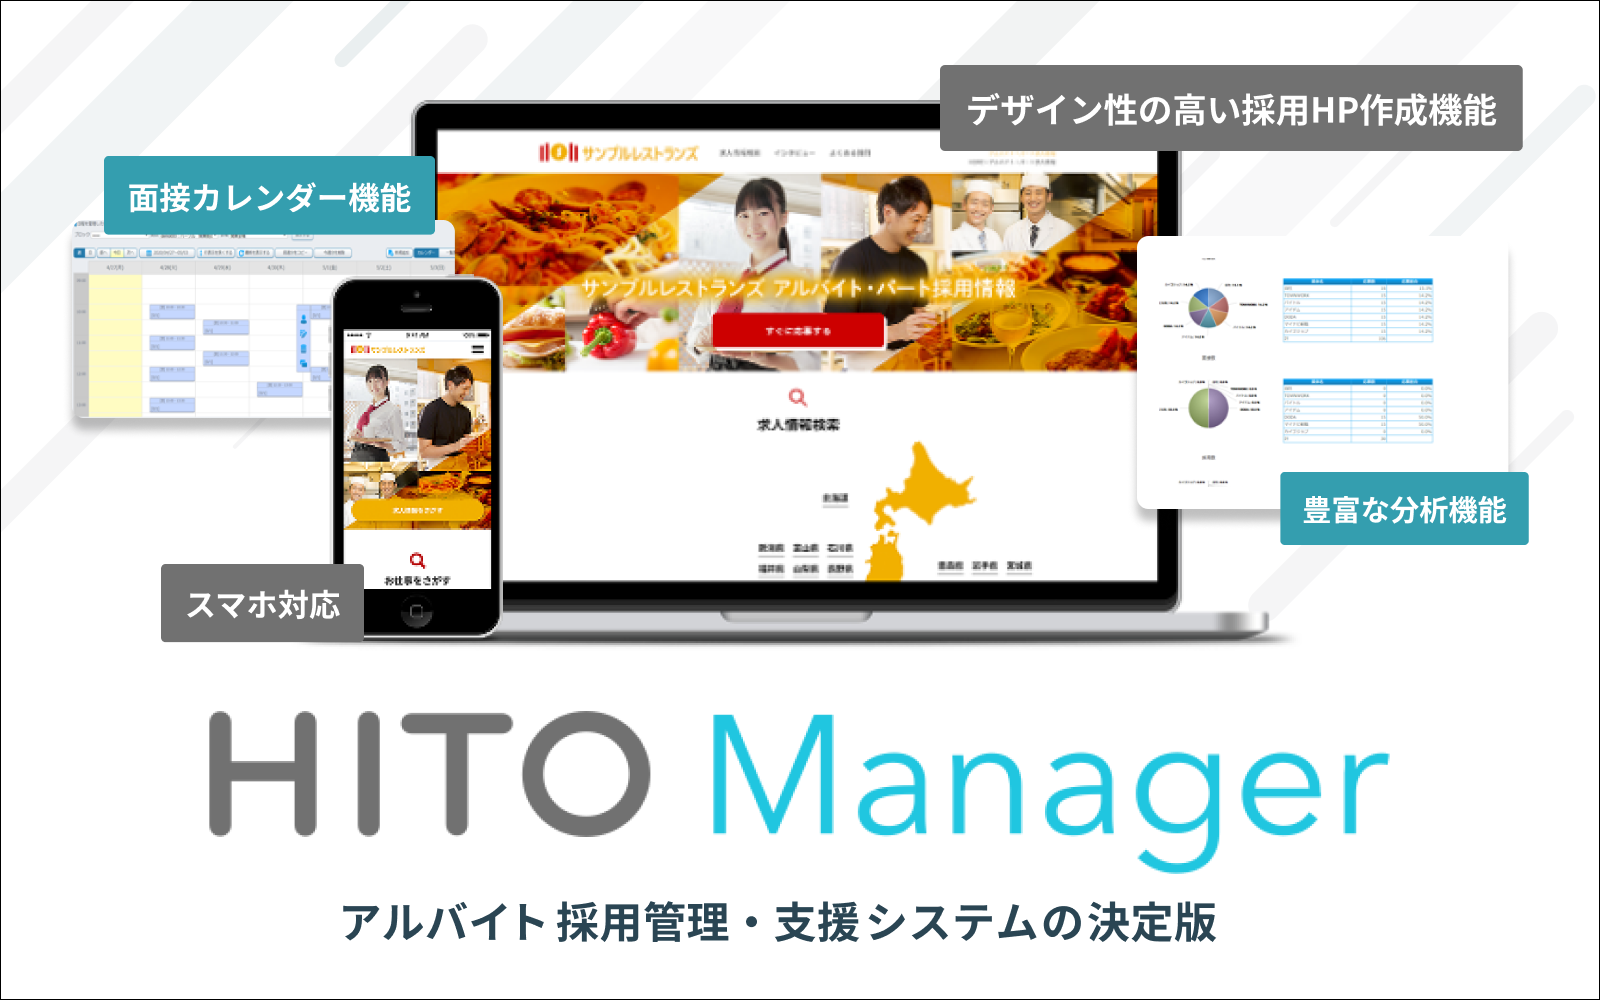 HITO-Manager